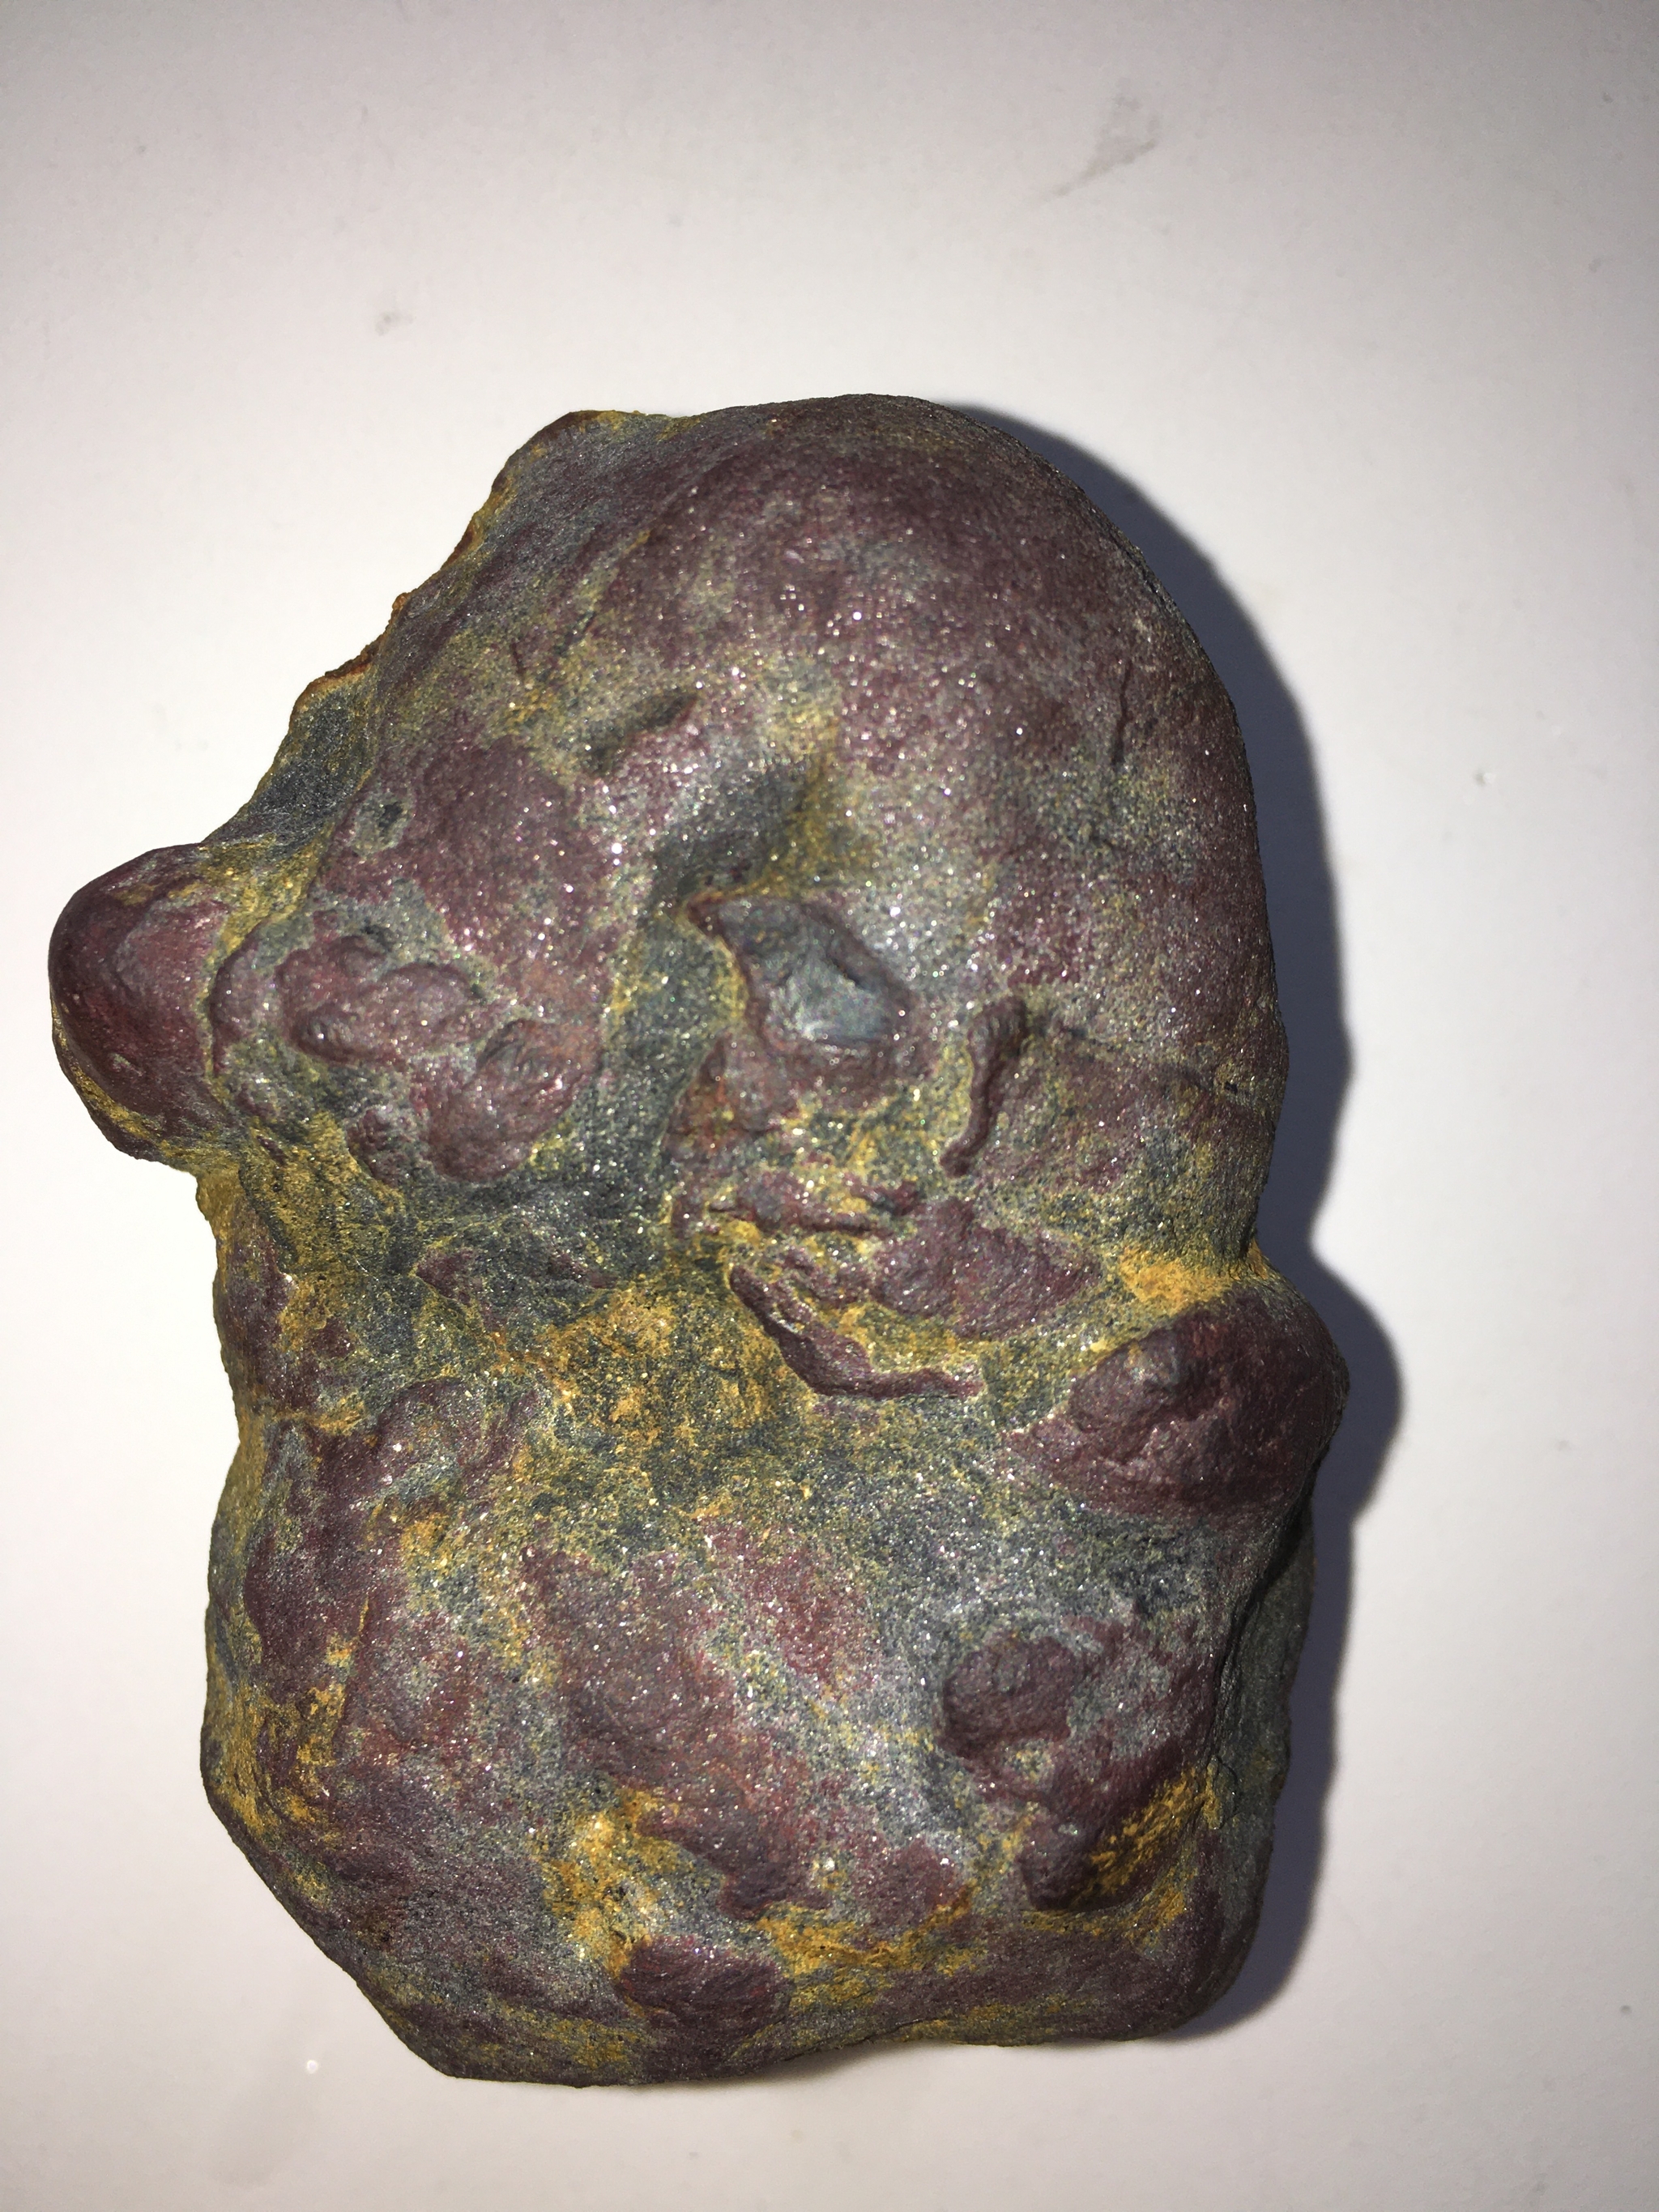 Help define what it is? - My, Find, Minerals, Ore, What's this?, Longpost